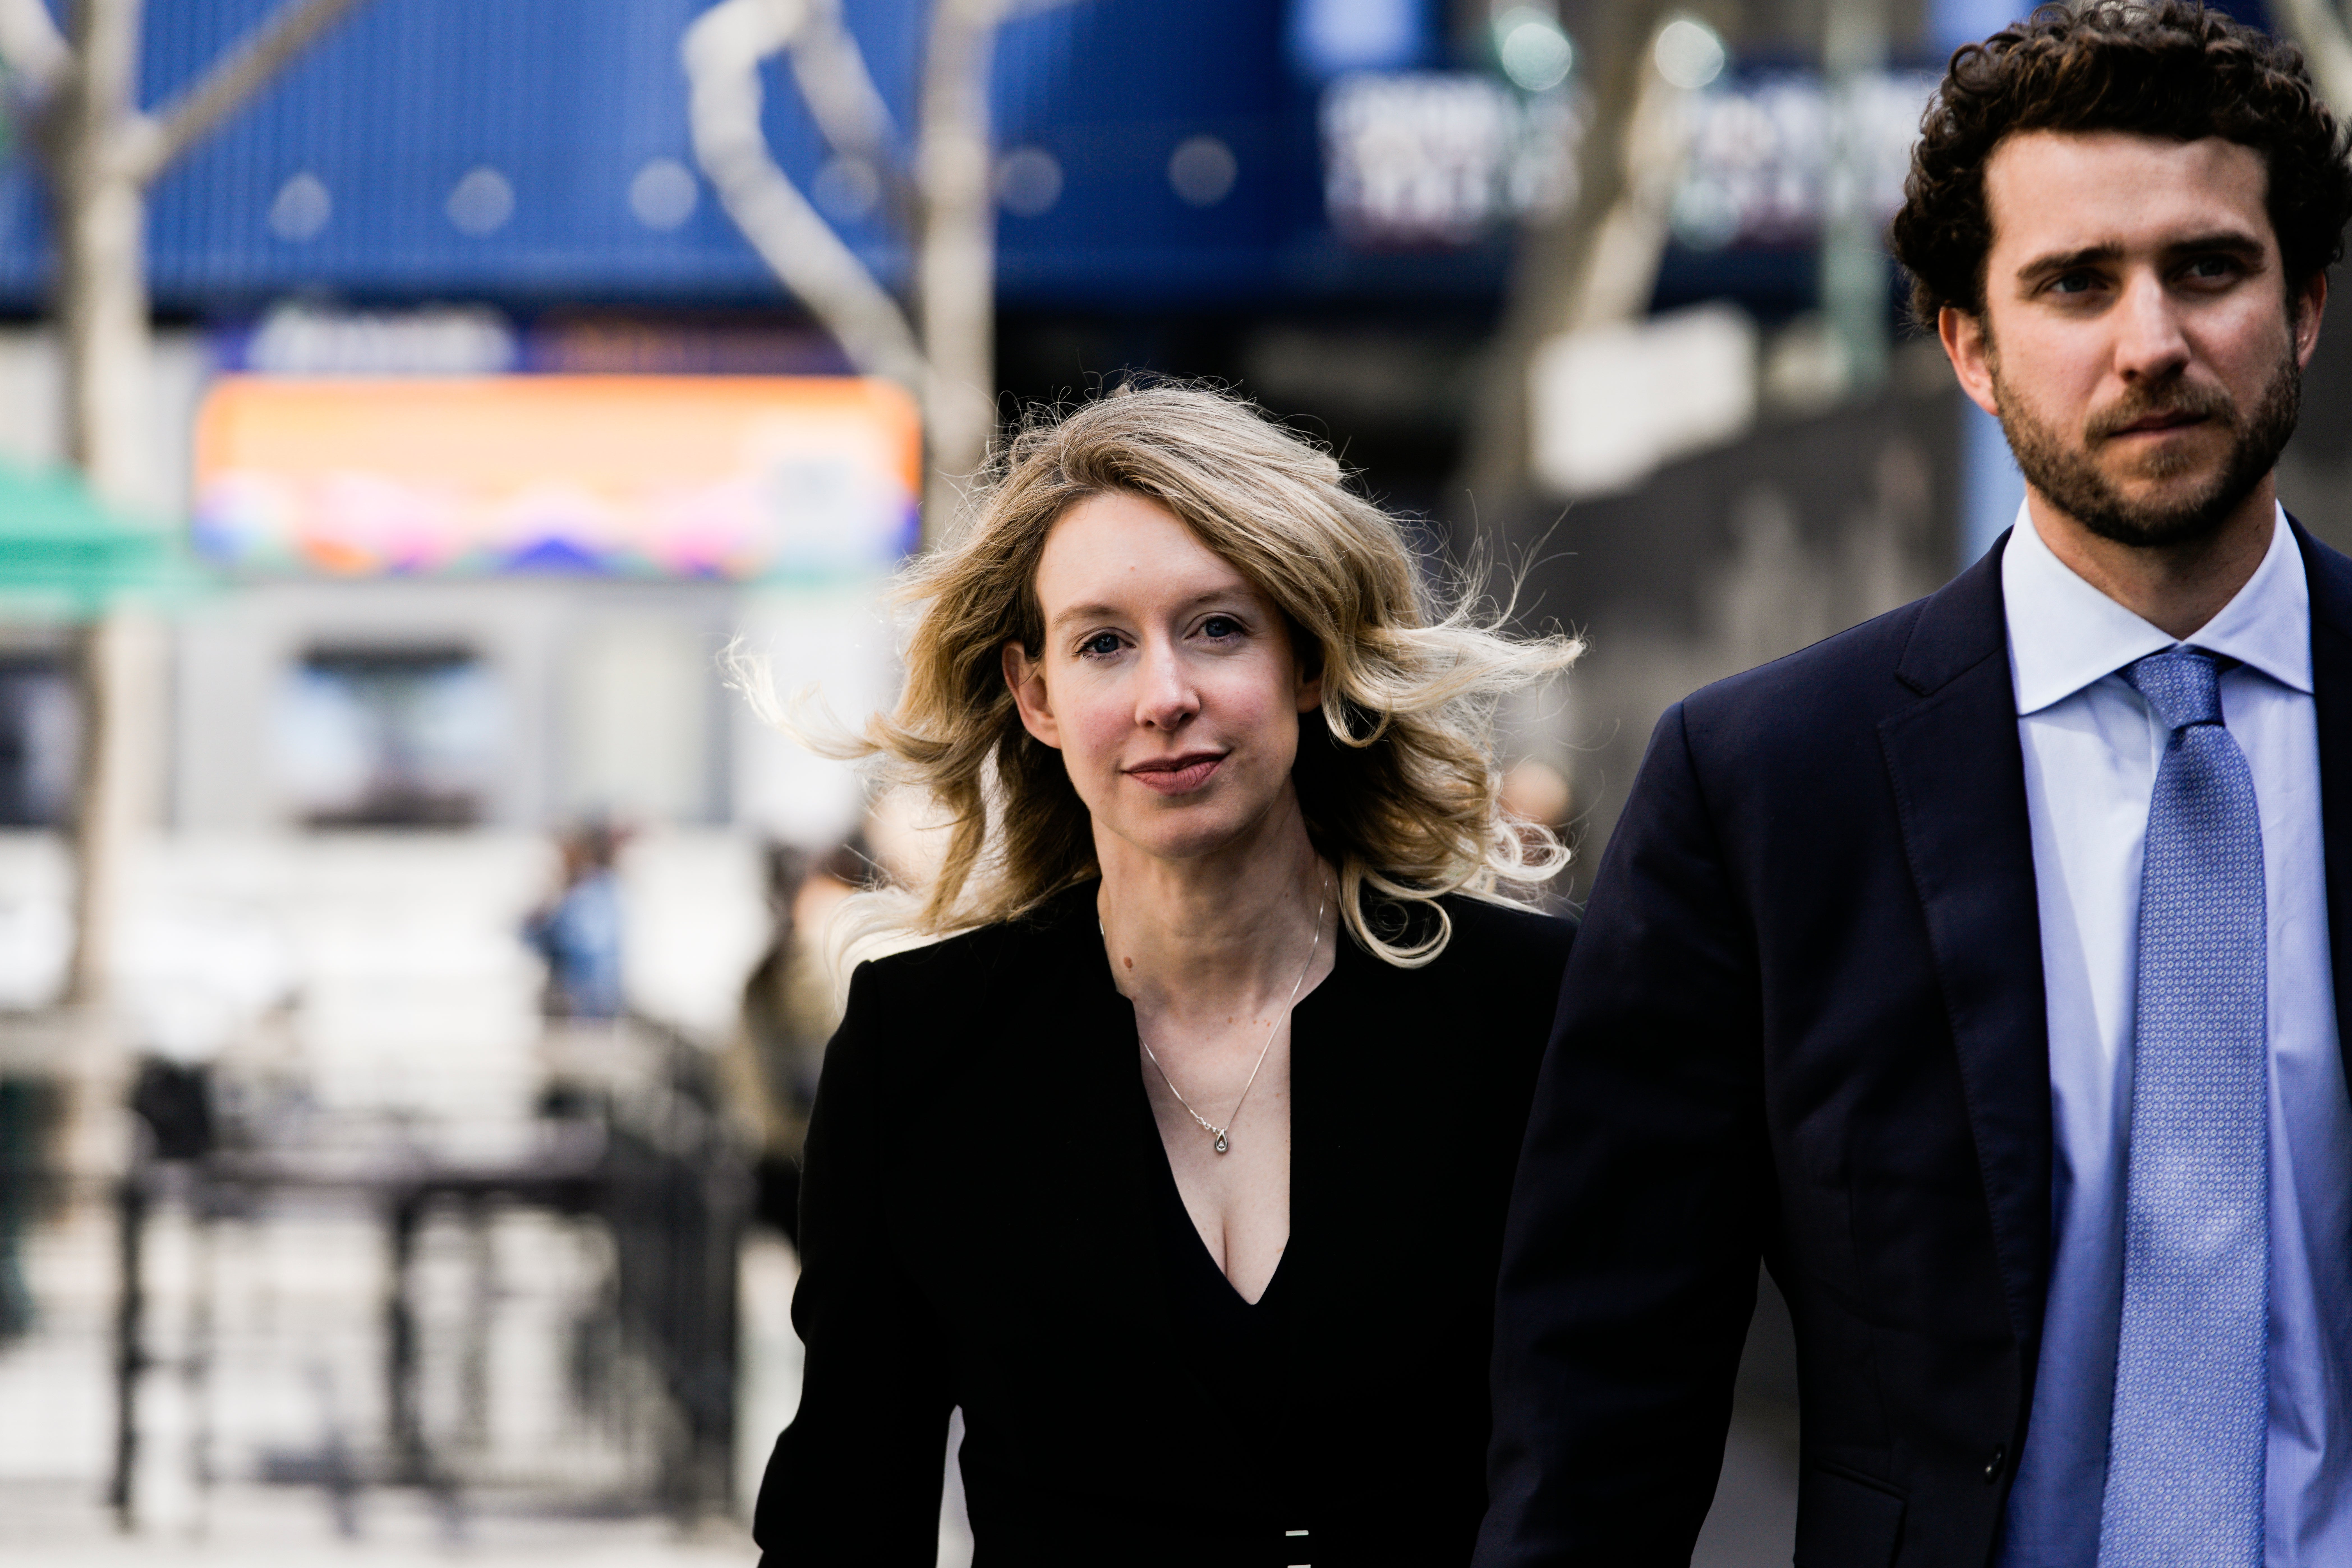 Former Theranos CEO Elizabeth Holmes alongside her boyfriend Billy Evans, walks back to her hotel following a hearing at the Robert E. Peckham U.S. Courthouse on March 17, 2023 in San Jose, California.